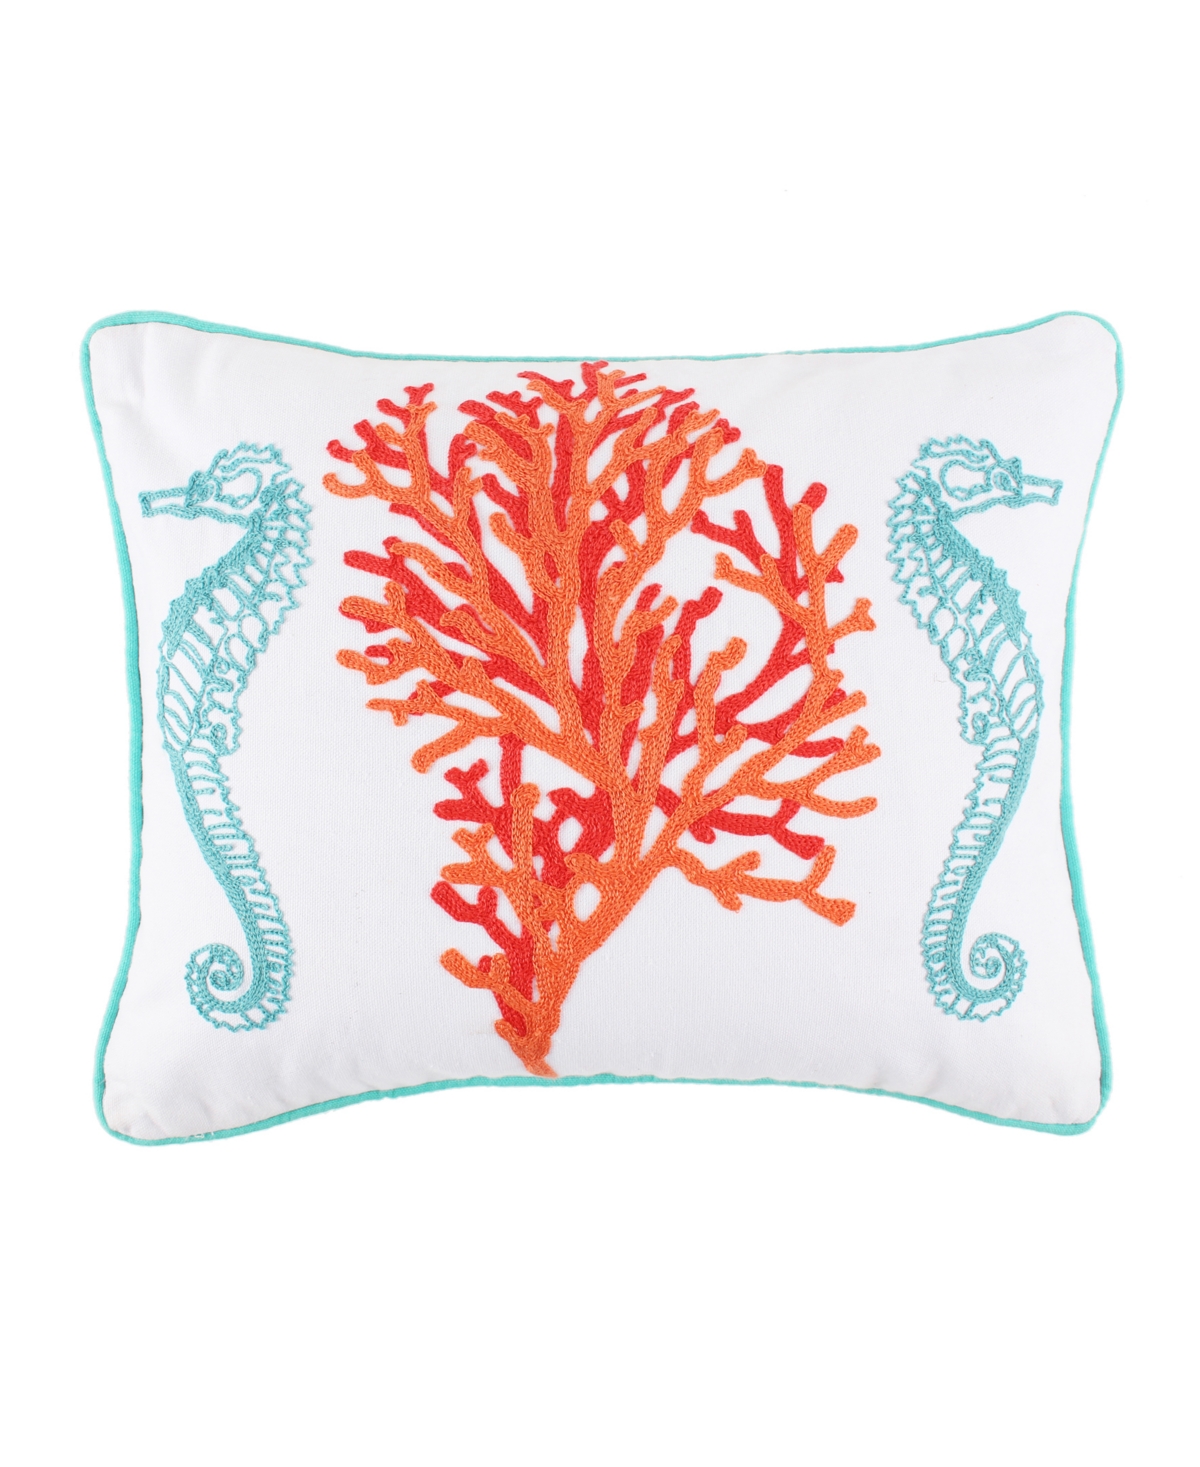 Levtex Sunset Bay Embroidered Decorative Pillow, 18" X 14" In Multi